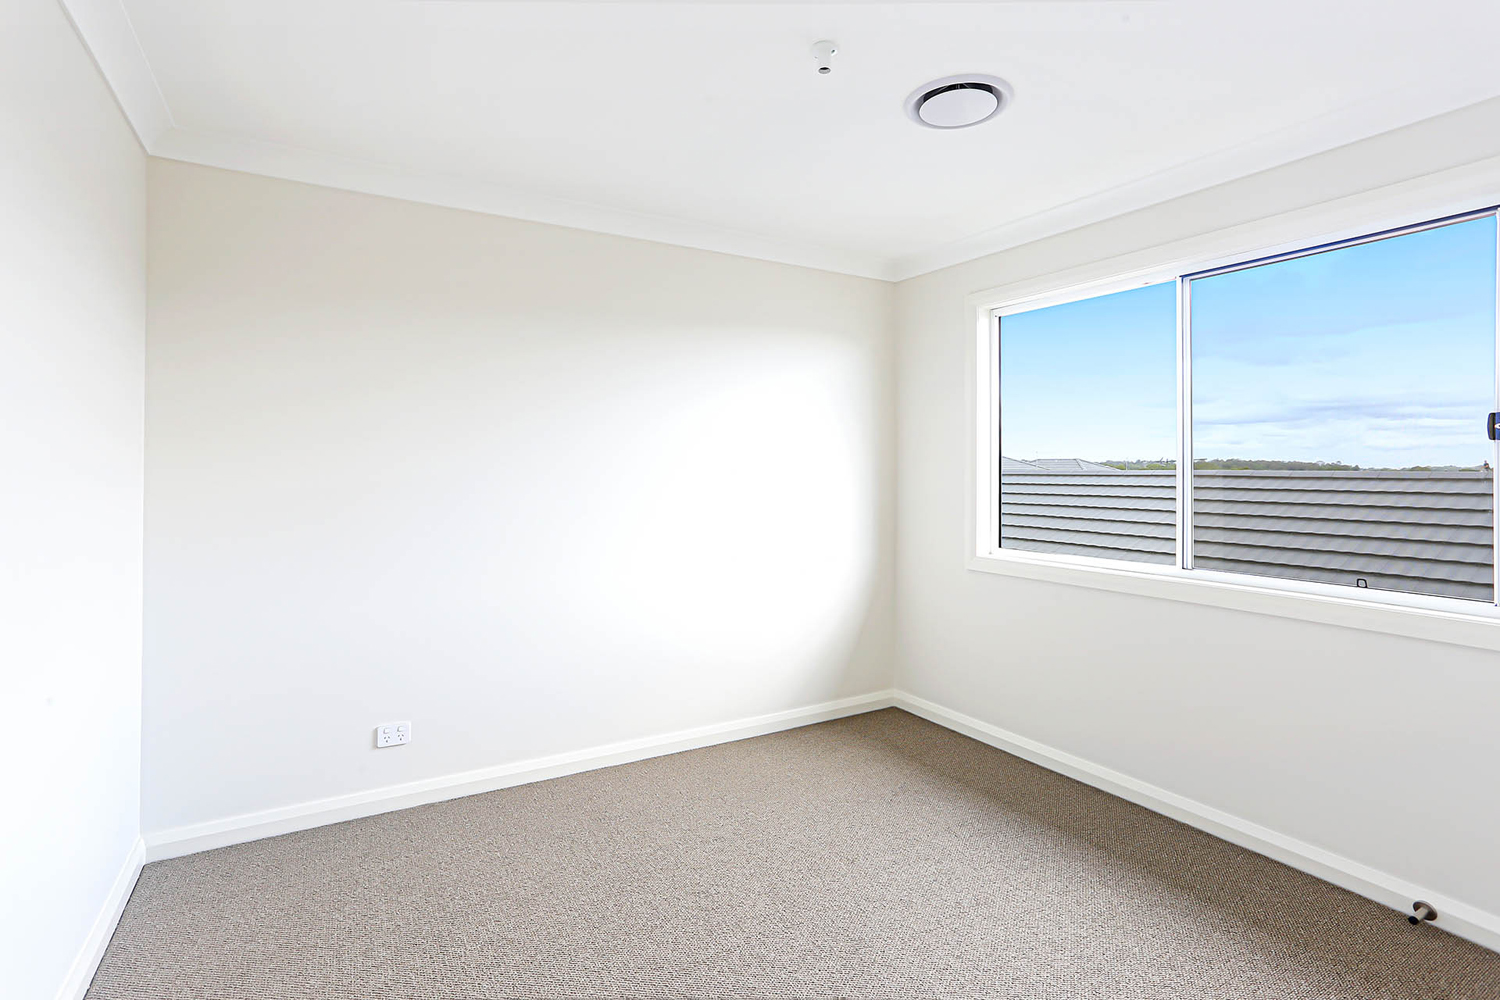 A Empty Room With A Window And Carpet